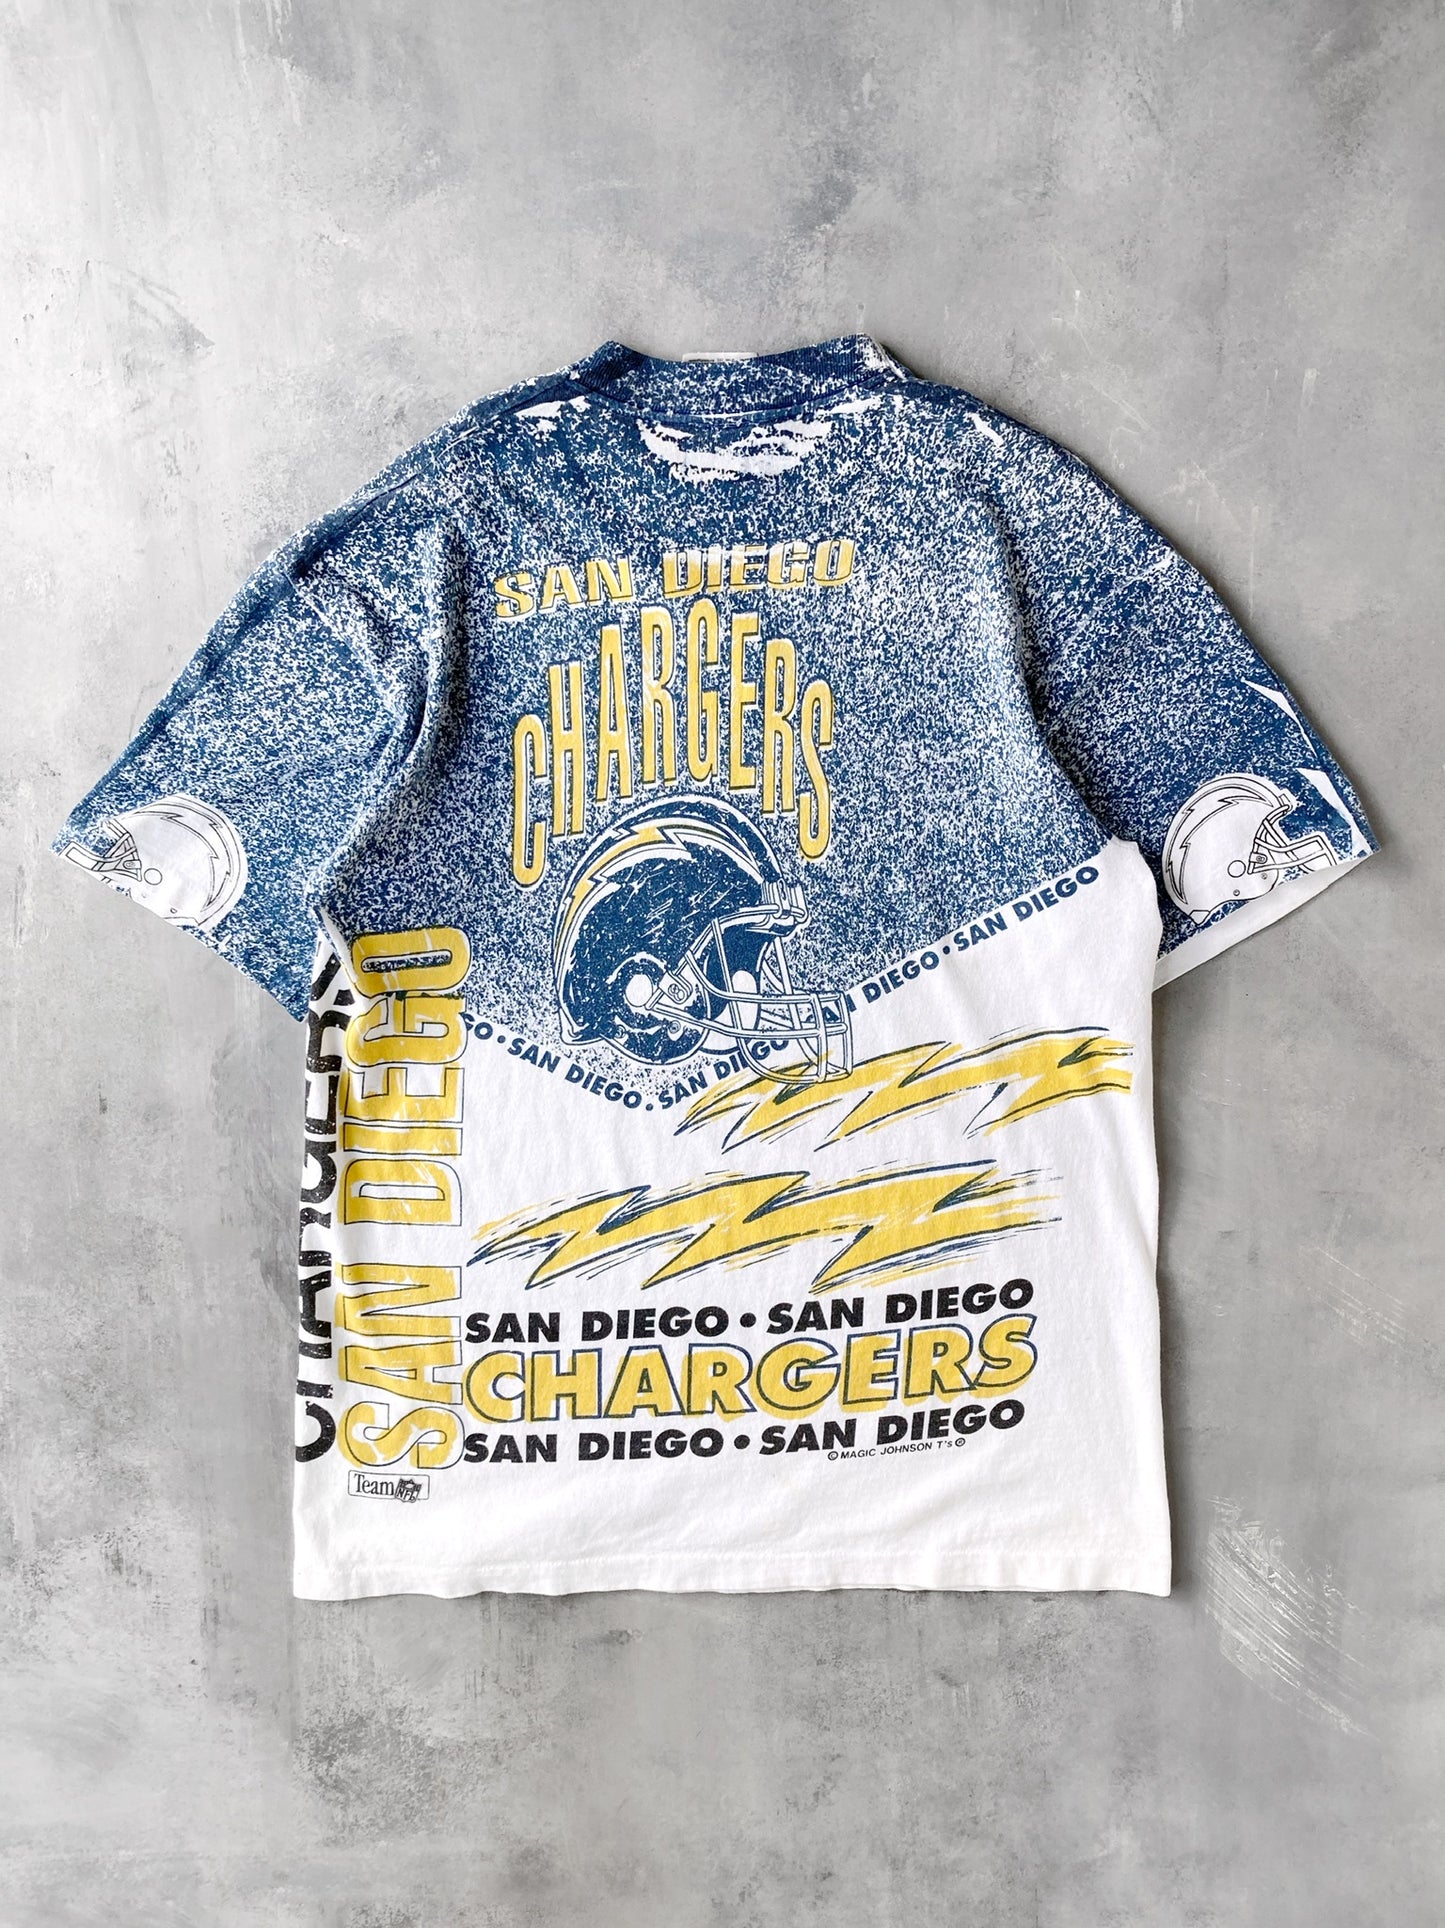 San Diego Chargers T-Shirt 90's - Large